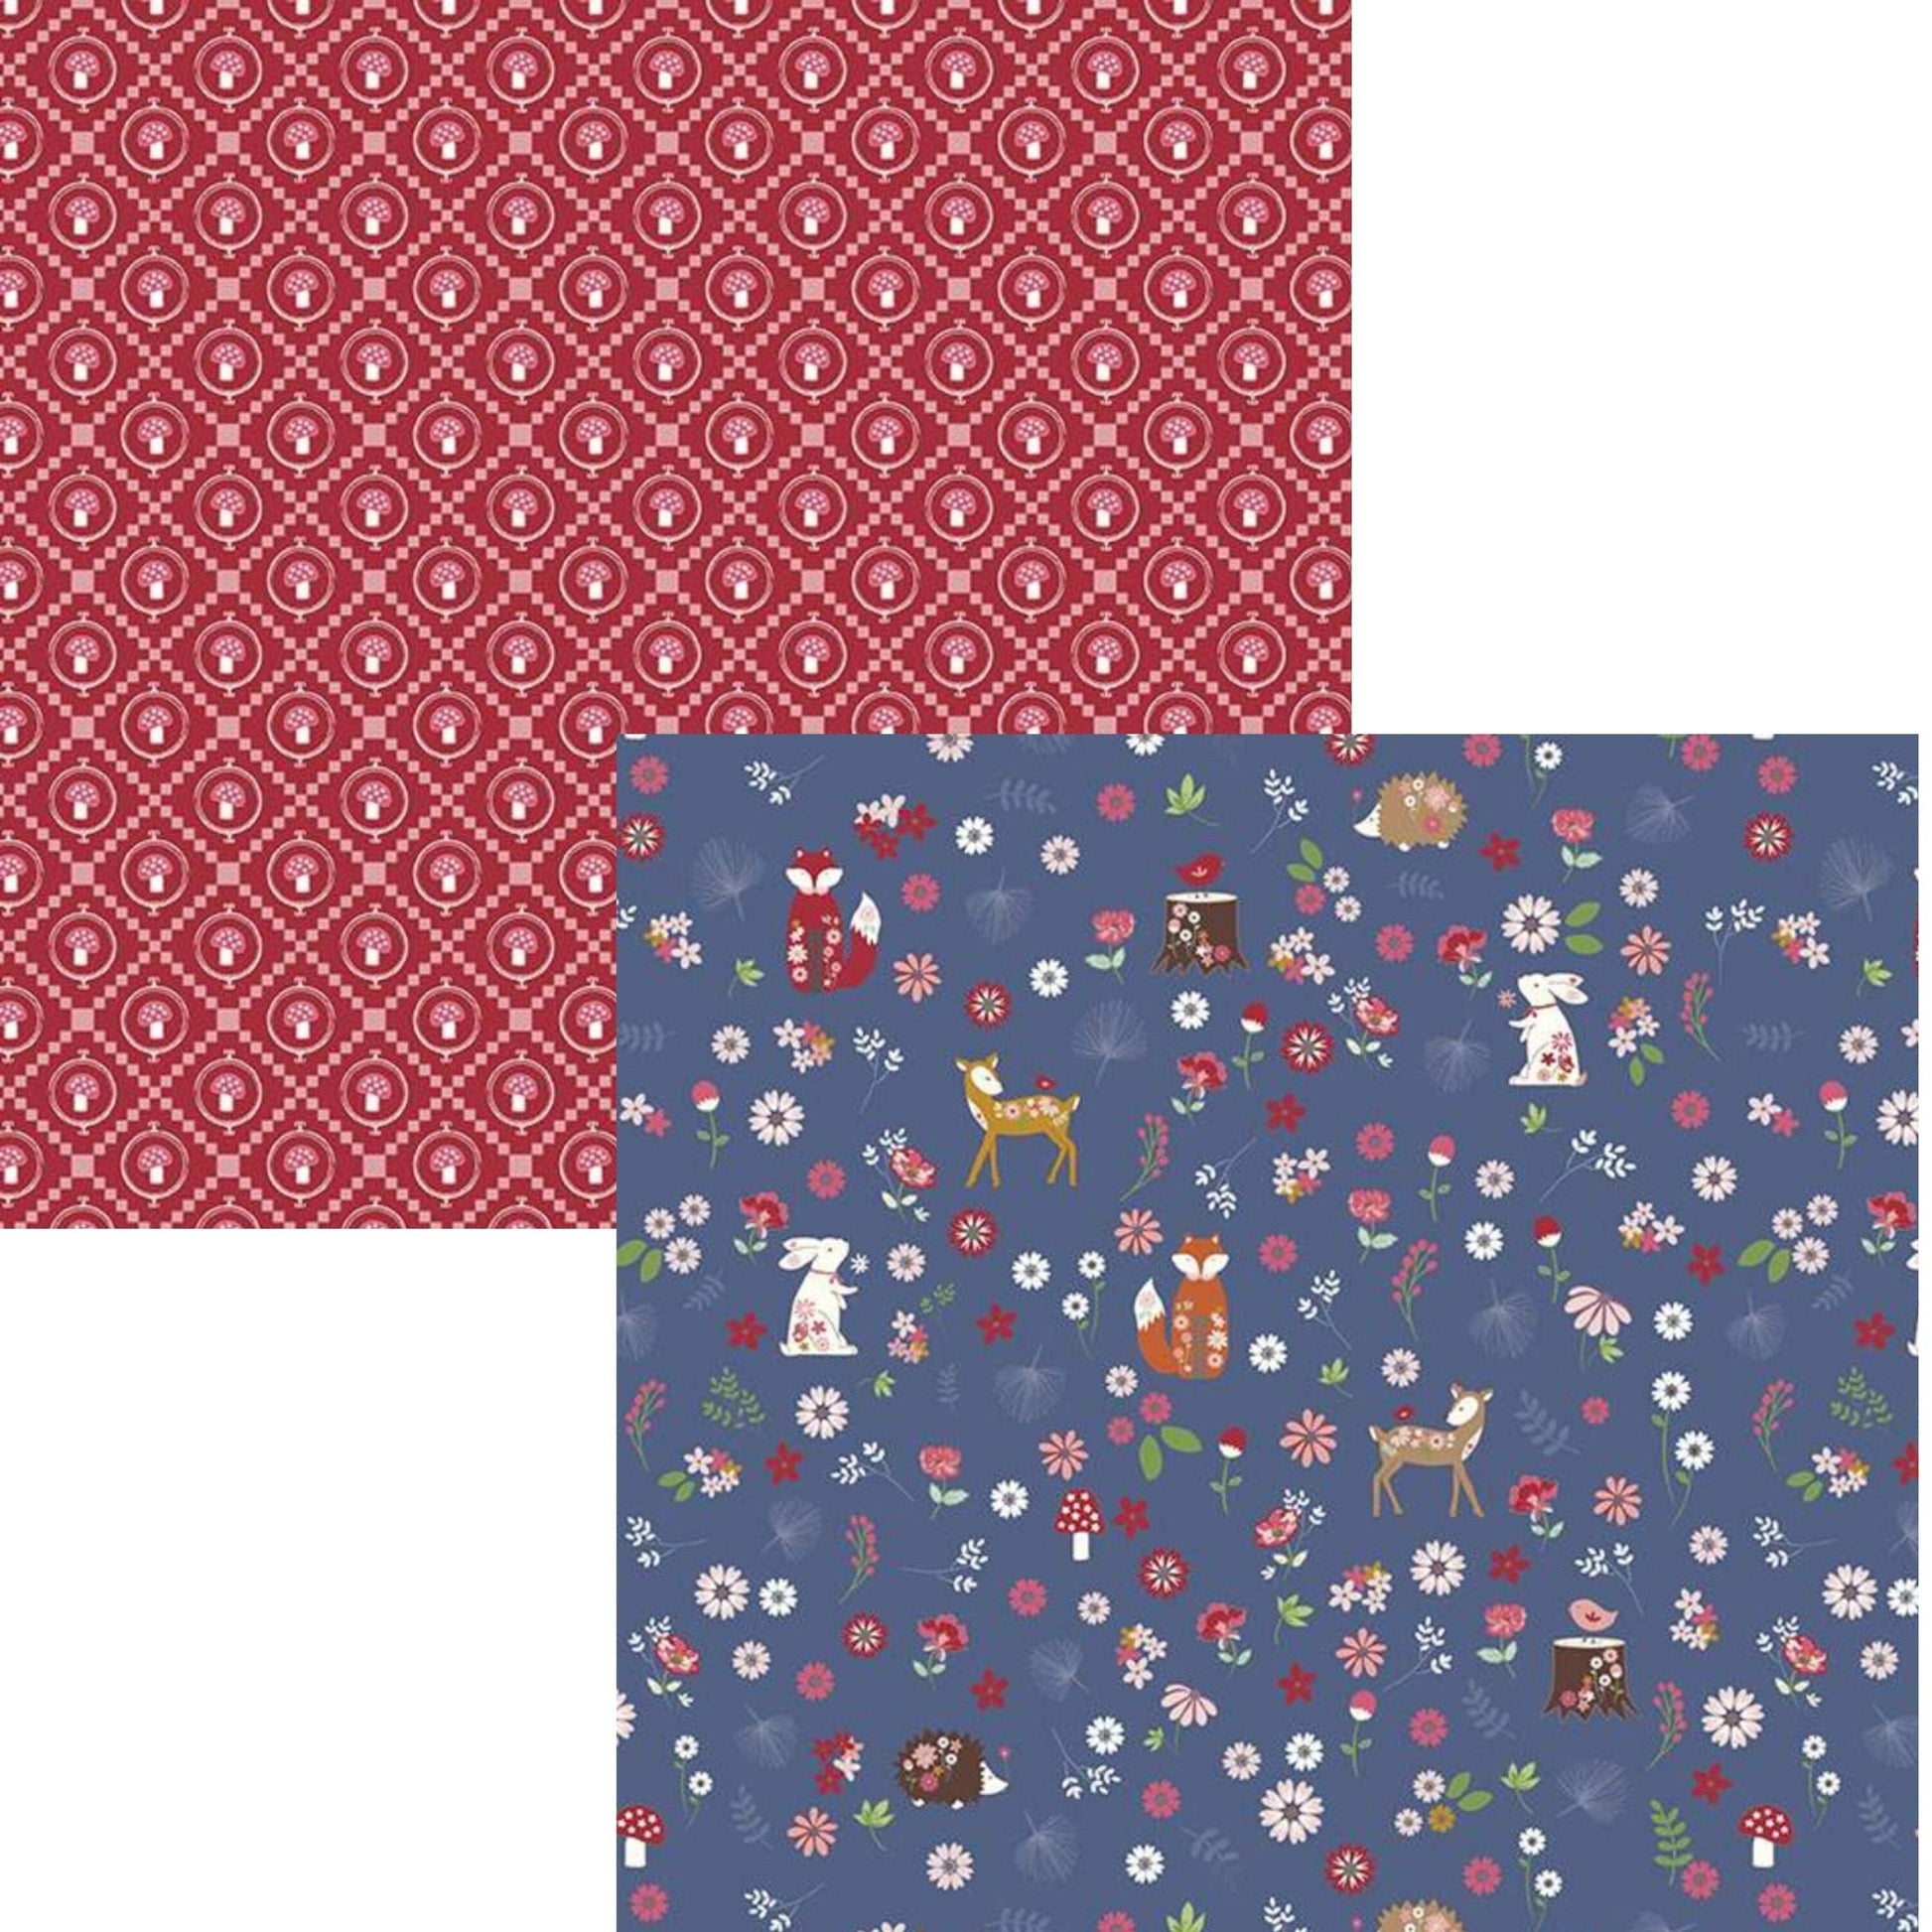 Enchanted Meadow Forest Friends Denim - LAMINATED Cotton Fabric - Riley Blake